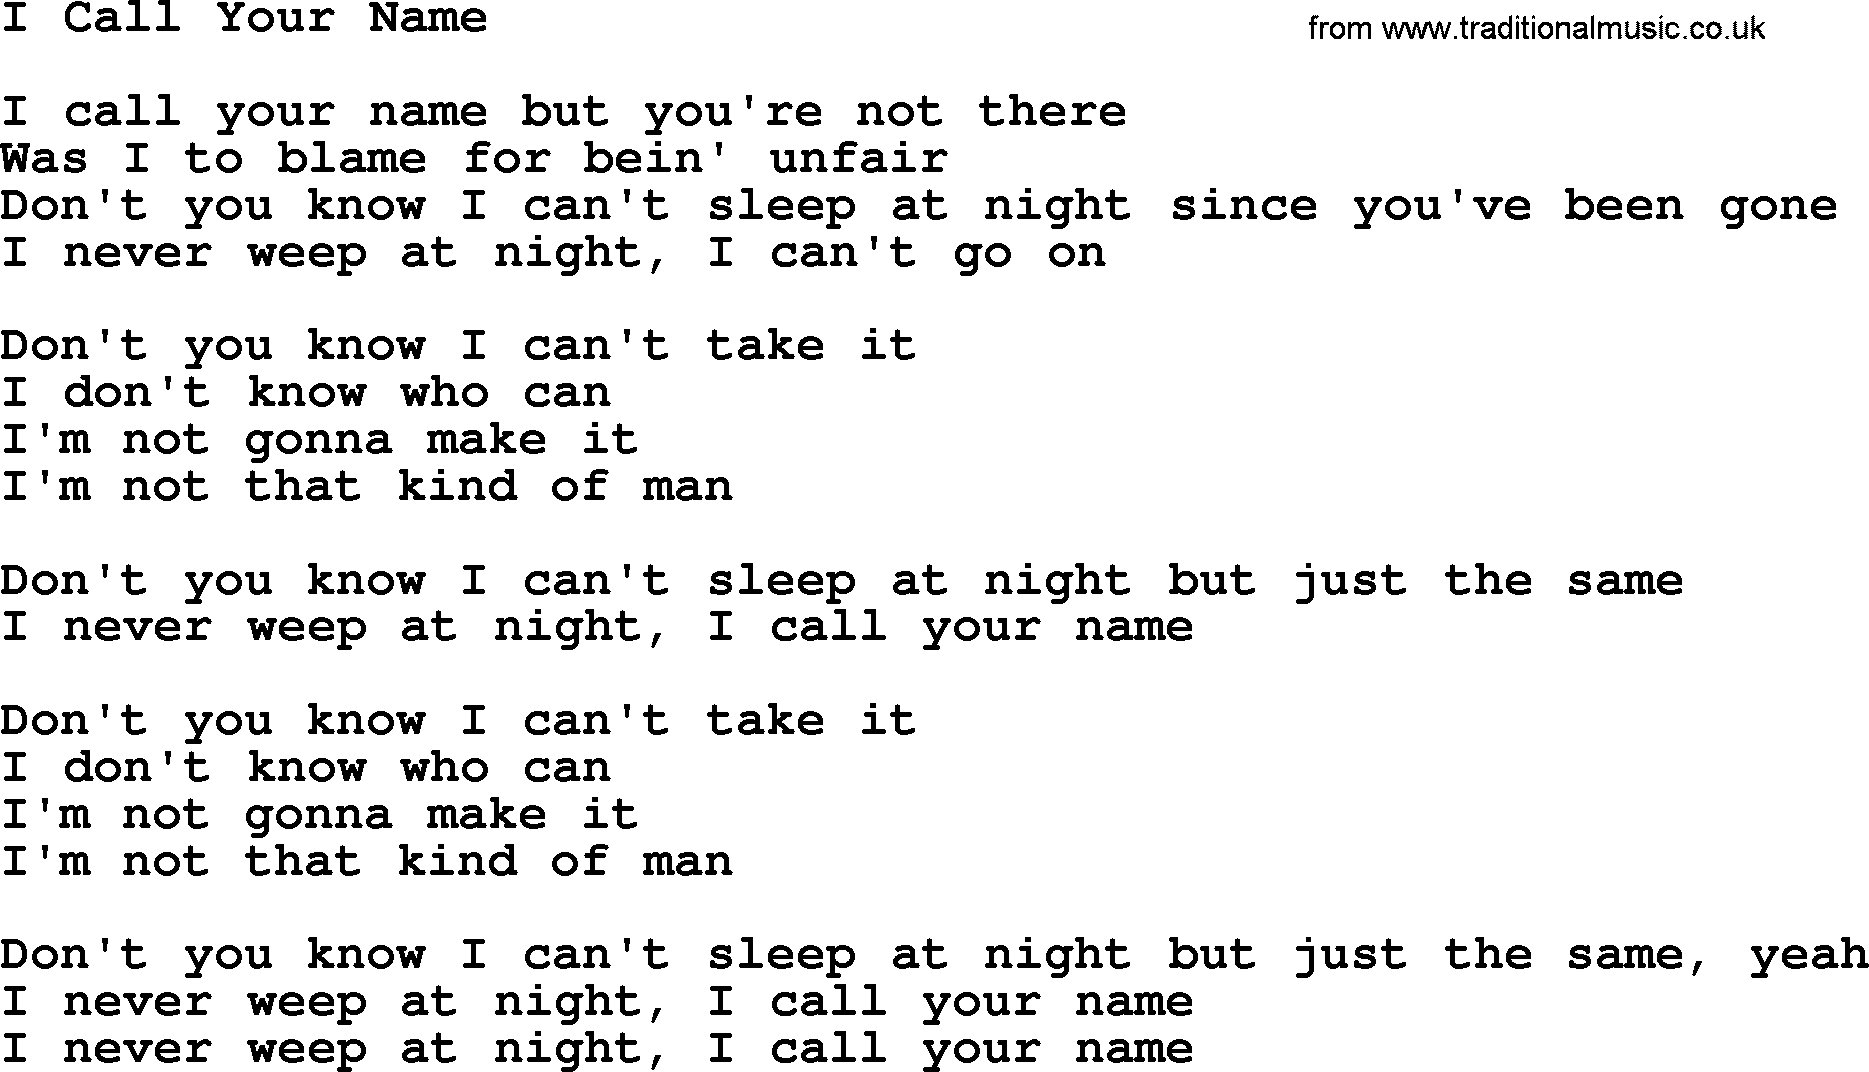 I Call Your Name, by The Byrds - lyrics with pdf